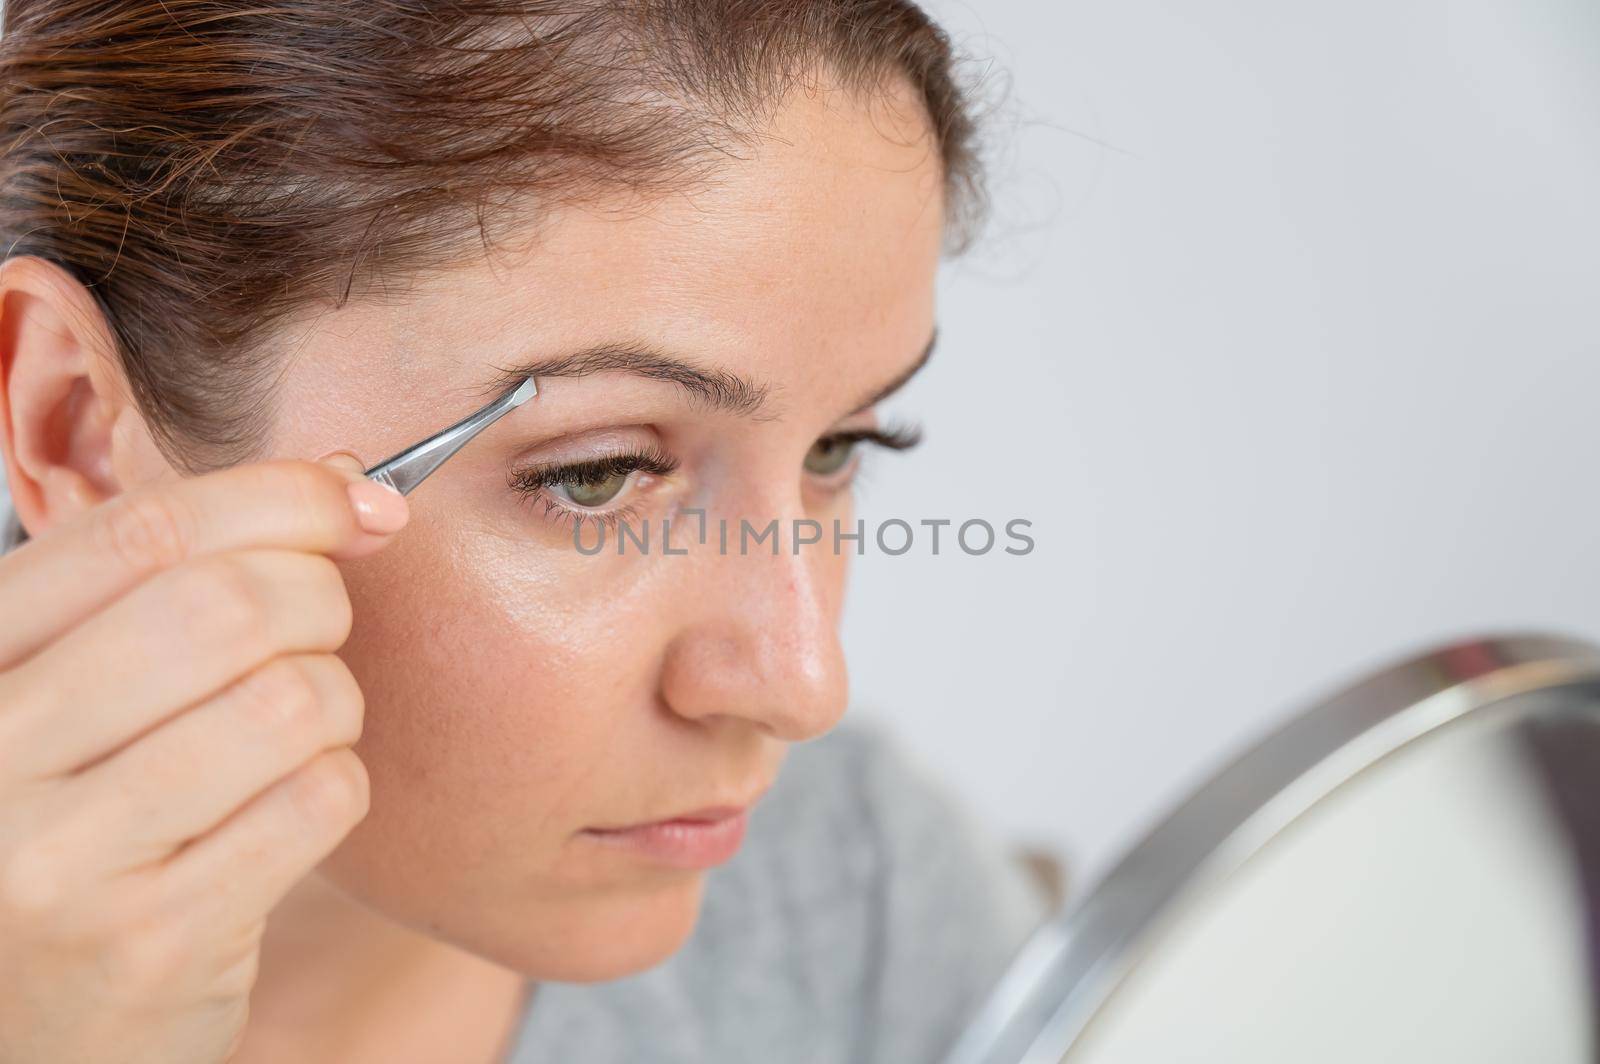 Caucasian woman looks in the mirror and does the eyebrow correction herself with tweezers by mrwed54